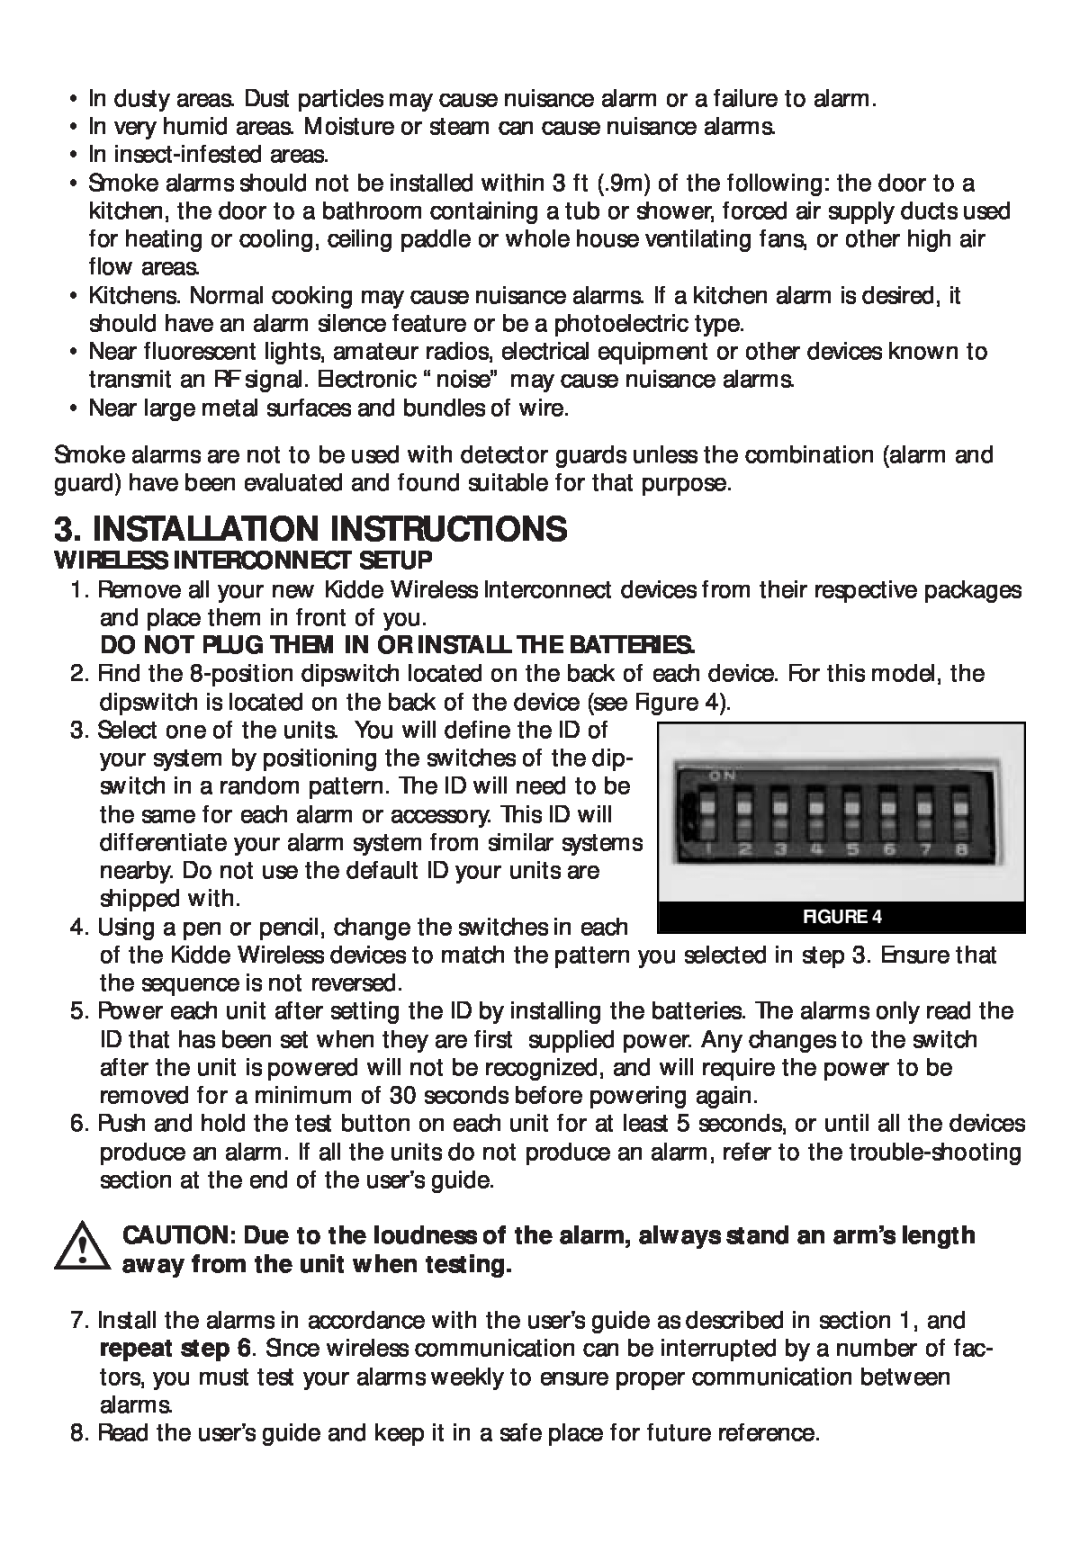 Kidde RF-SM-DC manual Installation Instructions, Wireless Interconnect Setup, Do Not Plug Them In Or Install The Batteries 